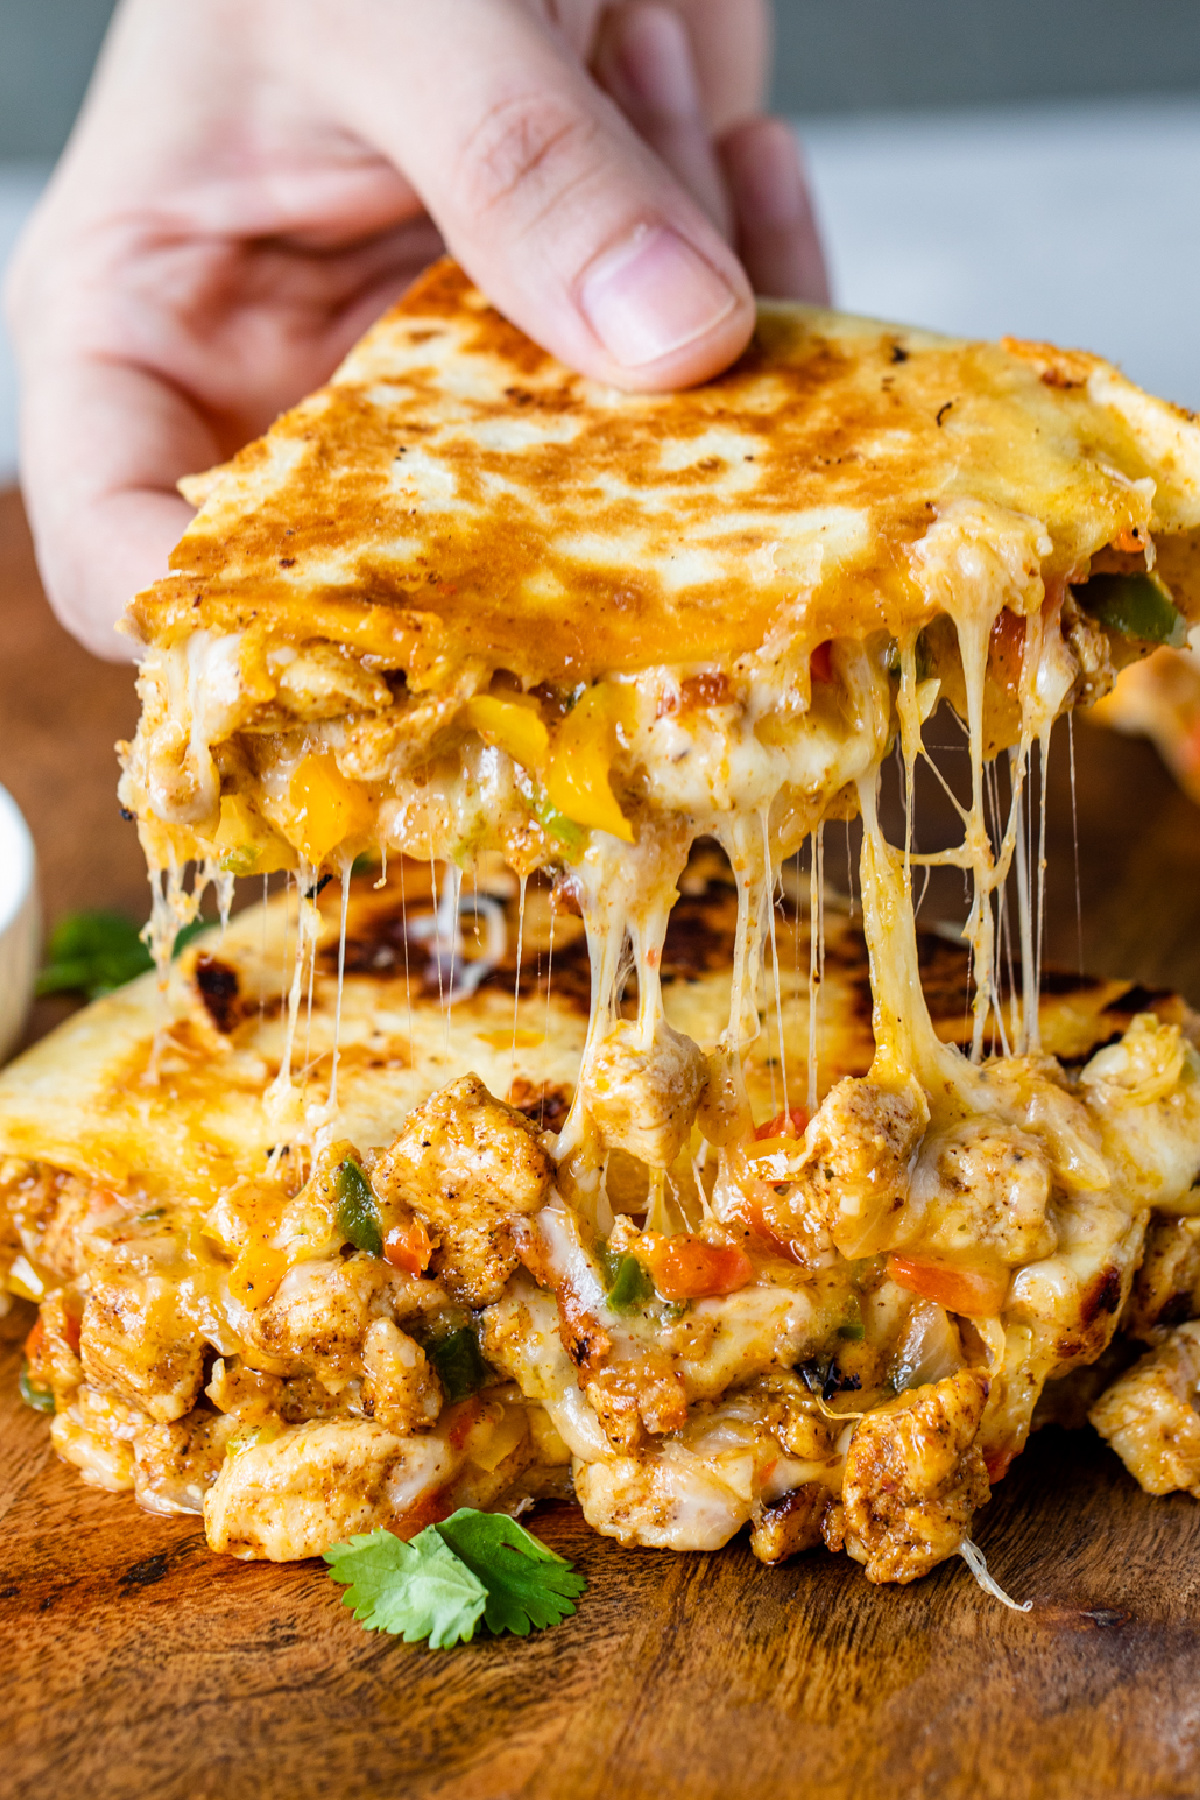 Cheap Party Food Ideas - Chicken Quesadillas with Basic Ingredients